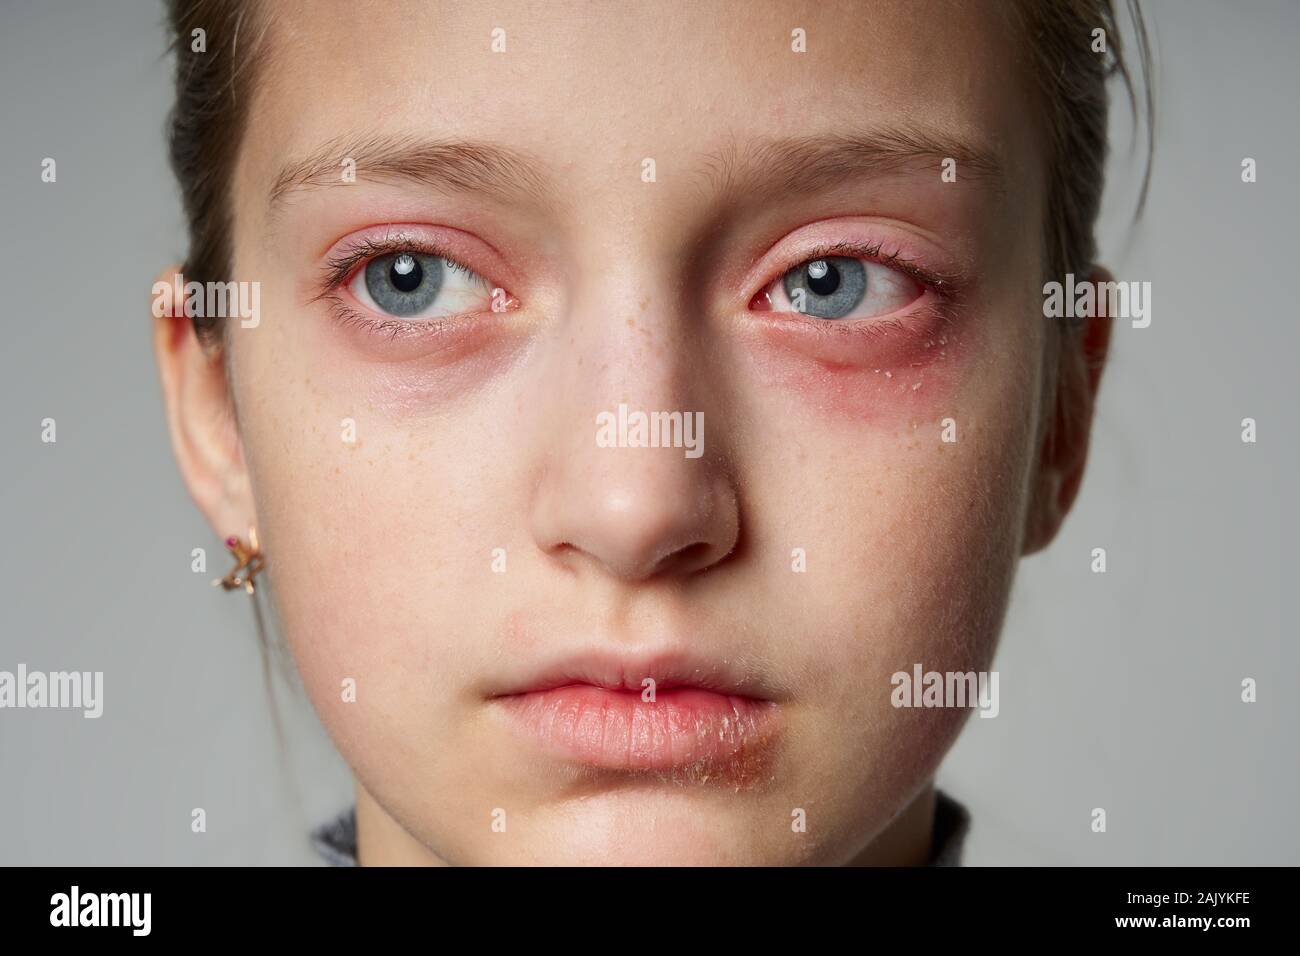 Allergic reaction, skin rash, close view portrait a girl's face. Redness and inflammation of the skin in the eyes and lips. Immune system disease Stock Photo Alamy